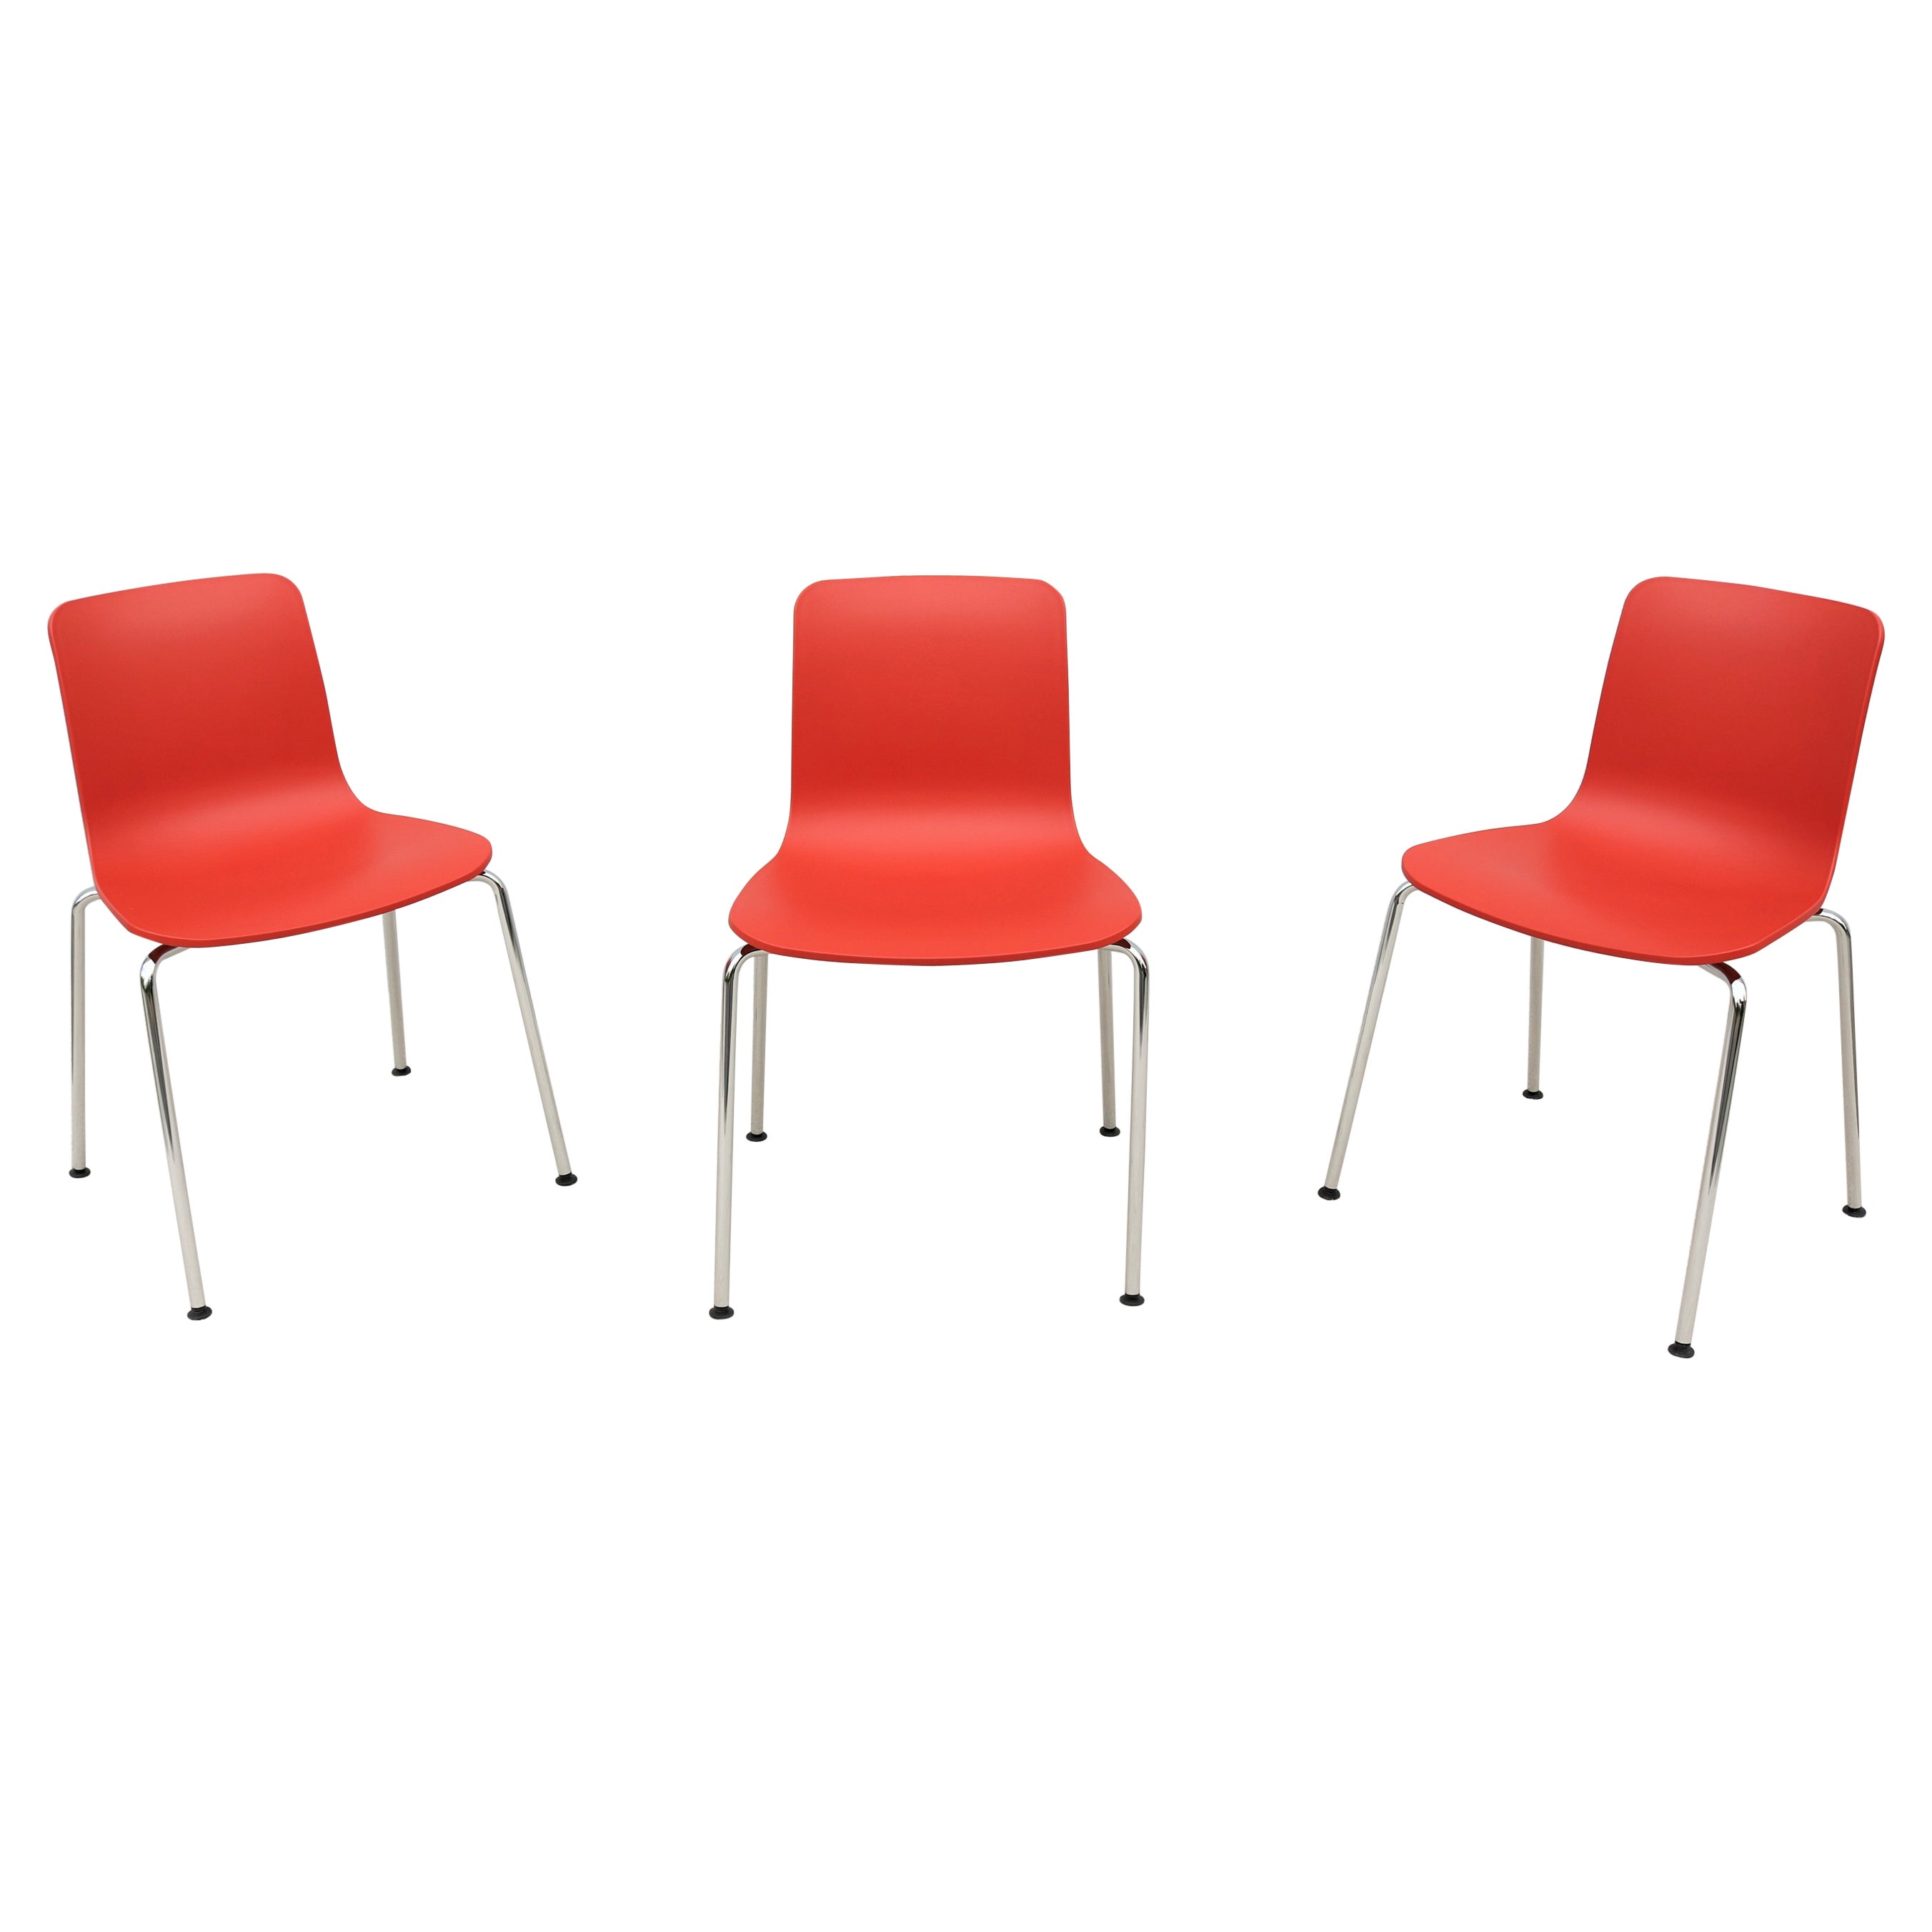 Italy Modern Jasper Morrison for Vitra HAL Tube Stackable Dining Chairs Set of 3 For Sale